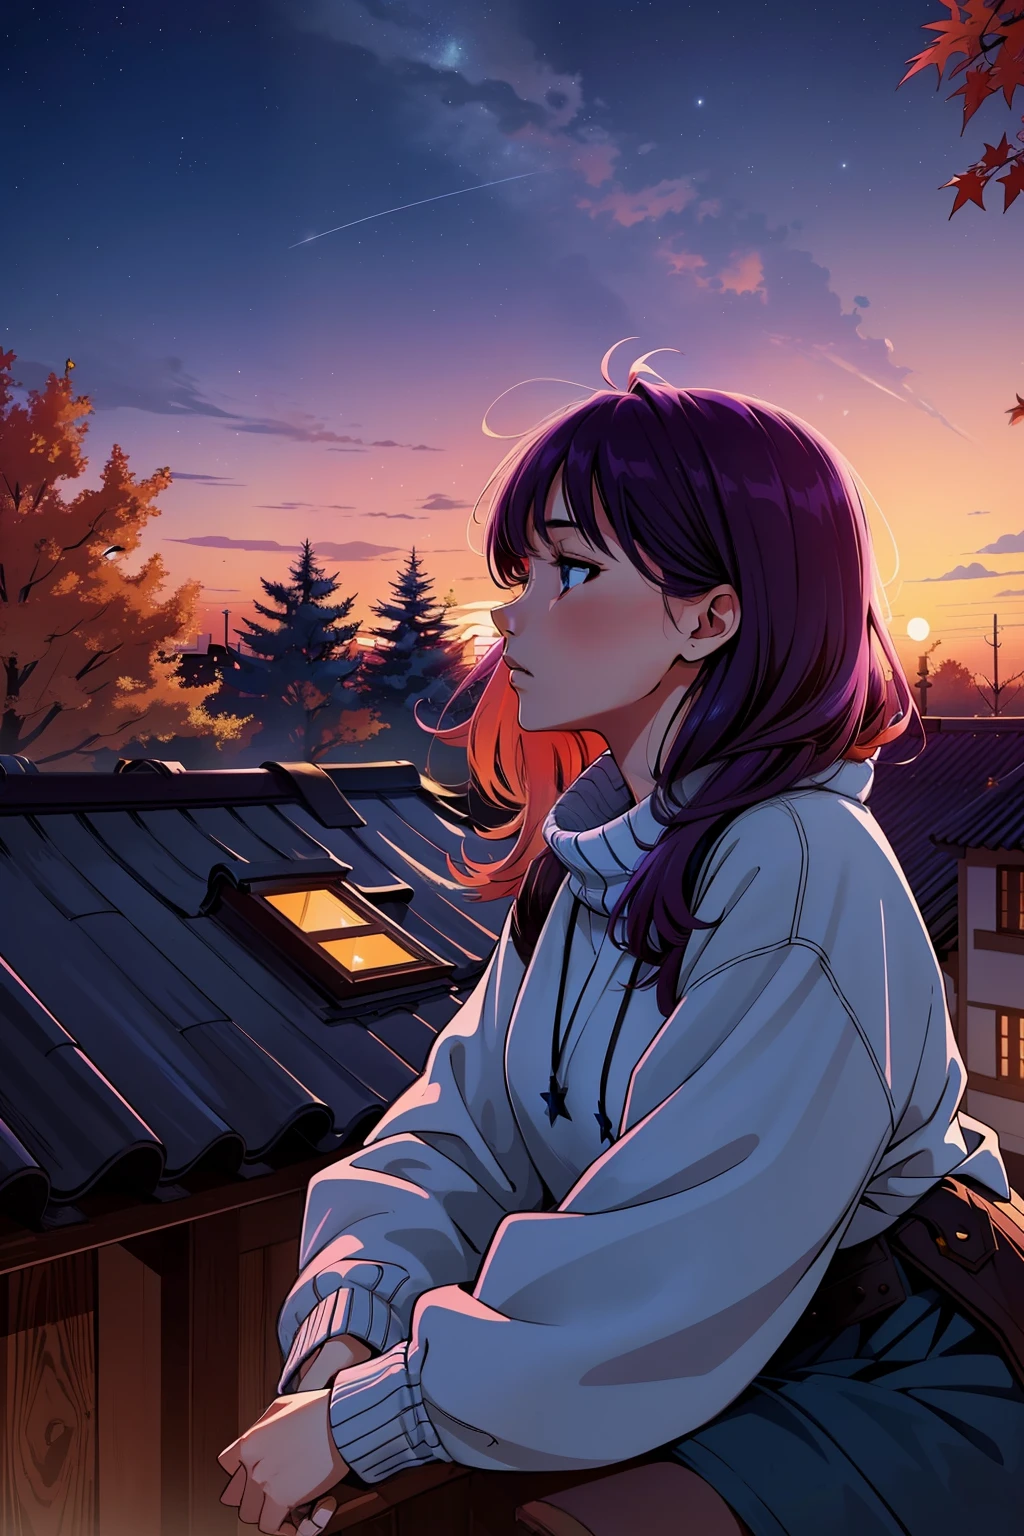 a young girls looks at the sunset Himmel from a roof, Herbst, Herbstfarben, Blätter, Bäume, Himmel, with Herbst colors and Prussian blue, cyan, ultramarin, Fuchsie, lila, Viele Stars